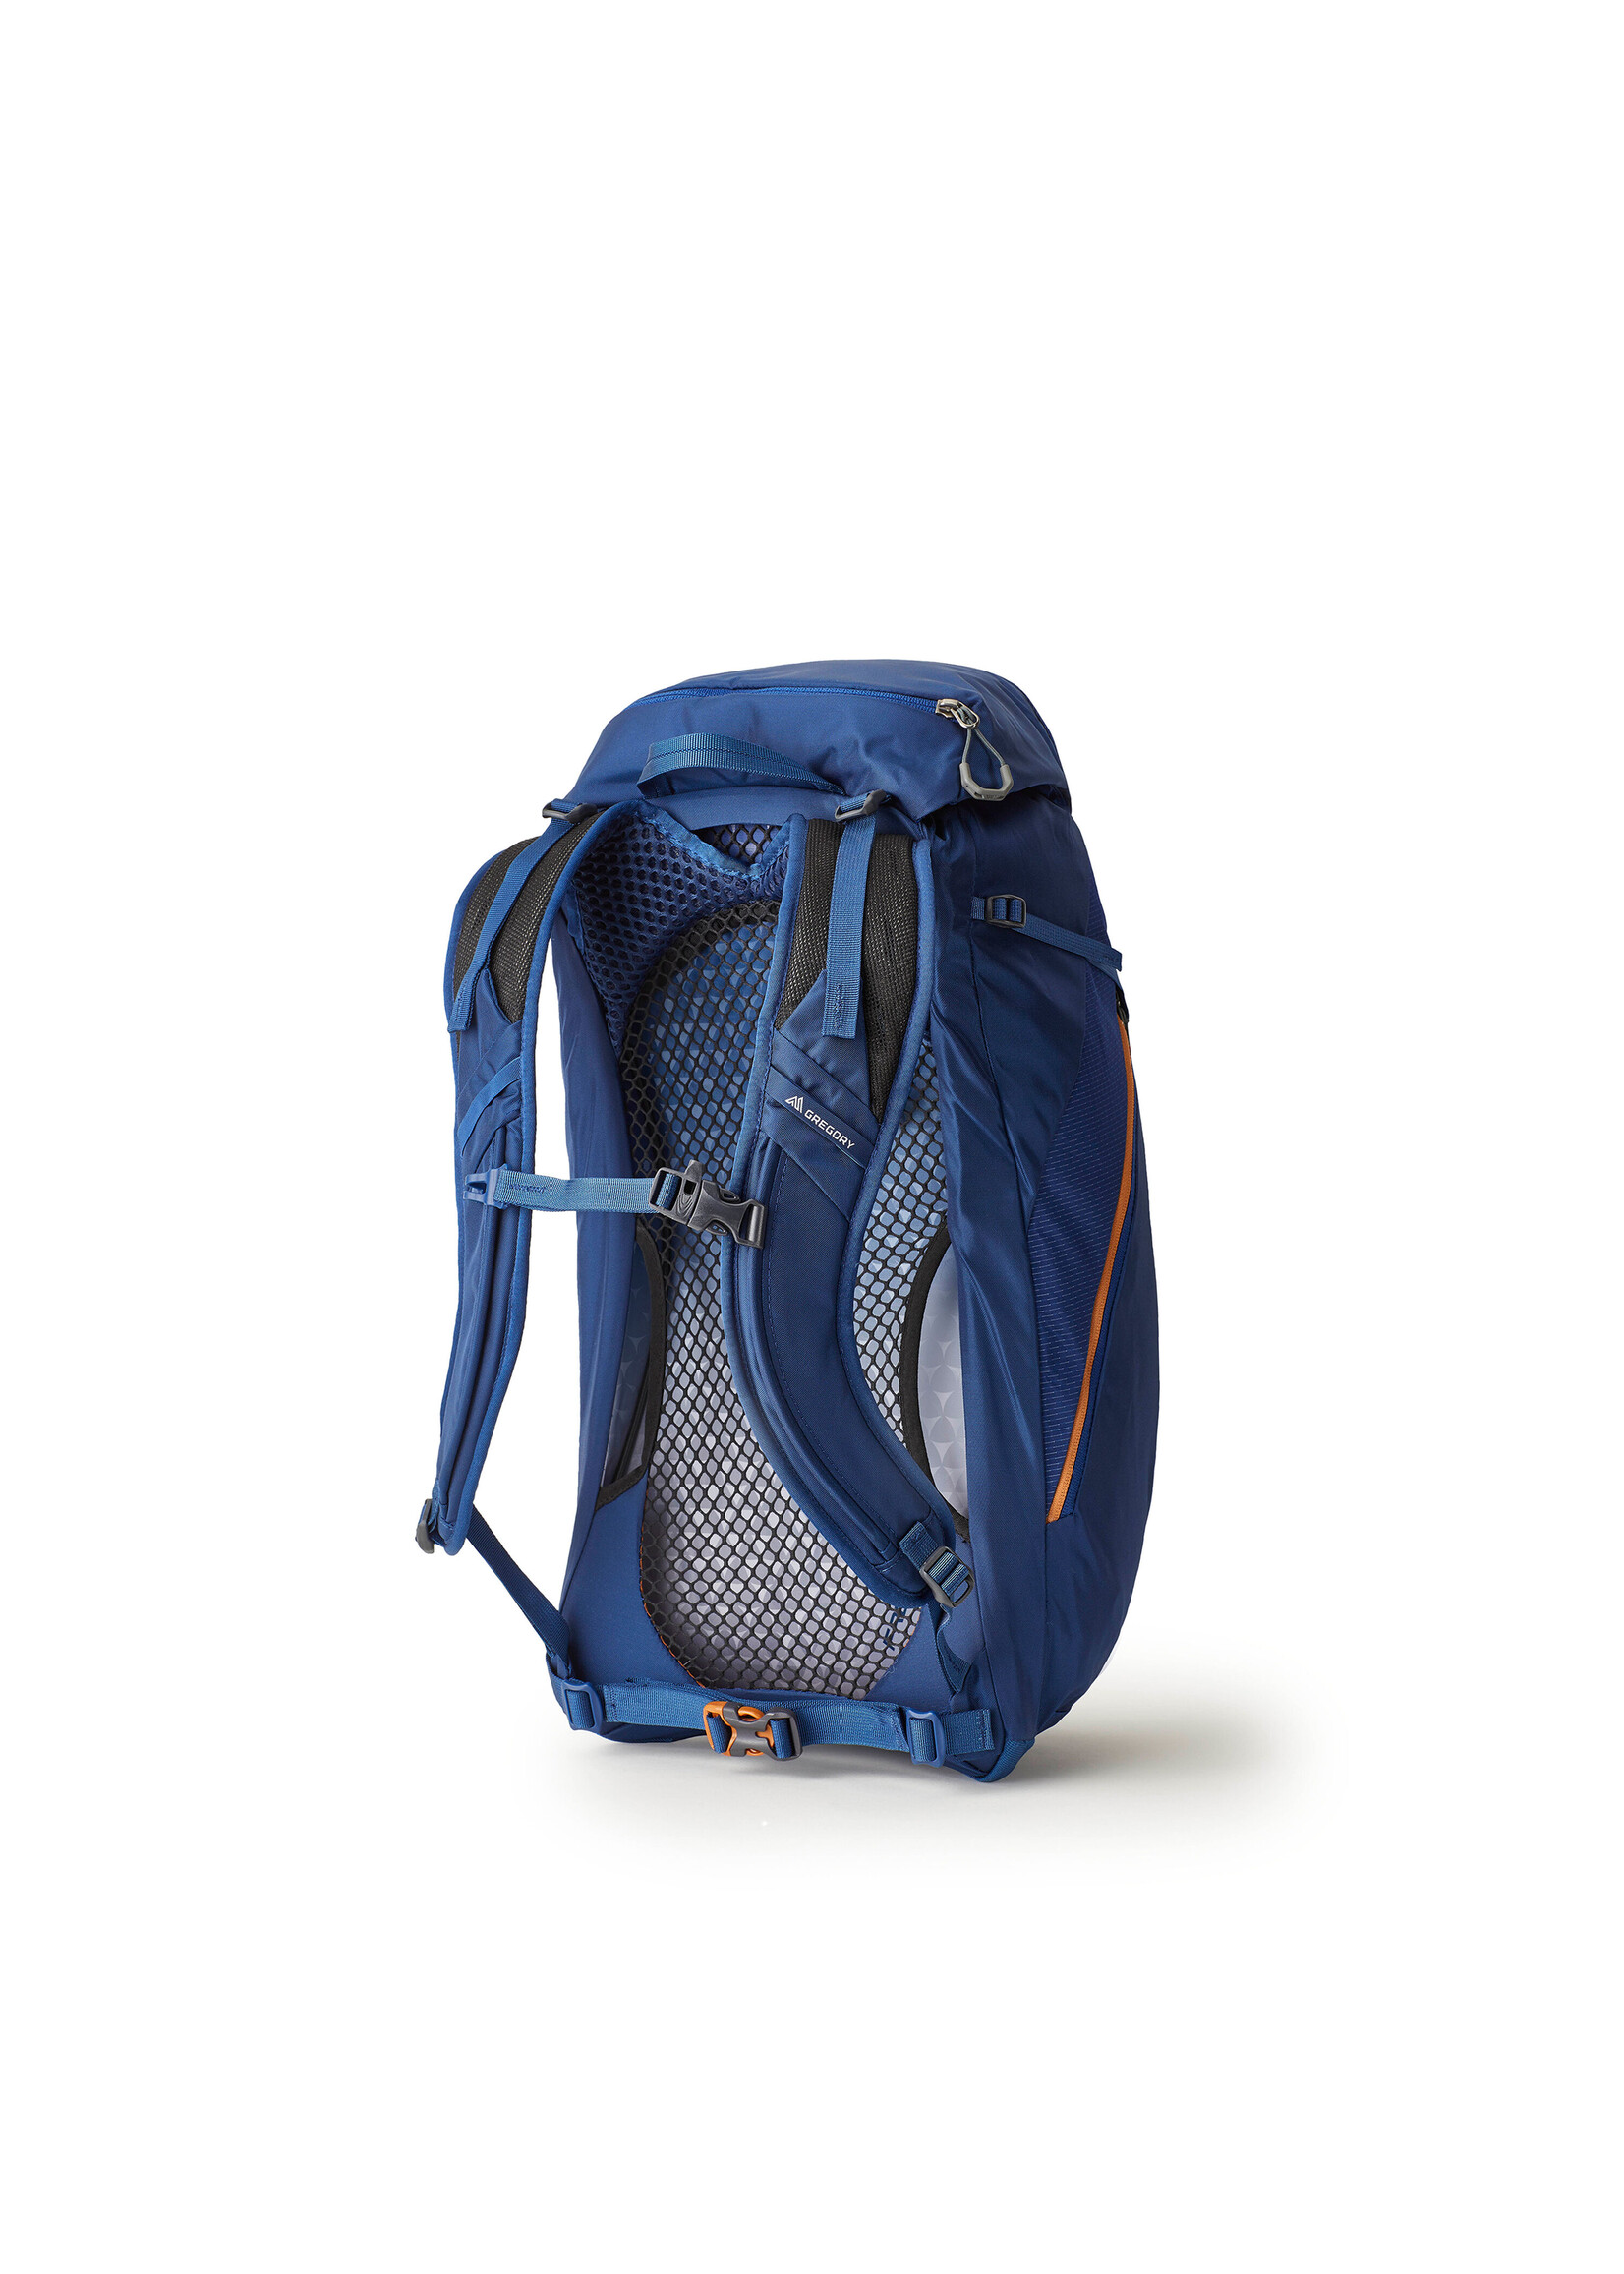 Gregory Arrio 24 Backpack - Empire Blue